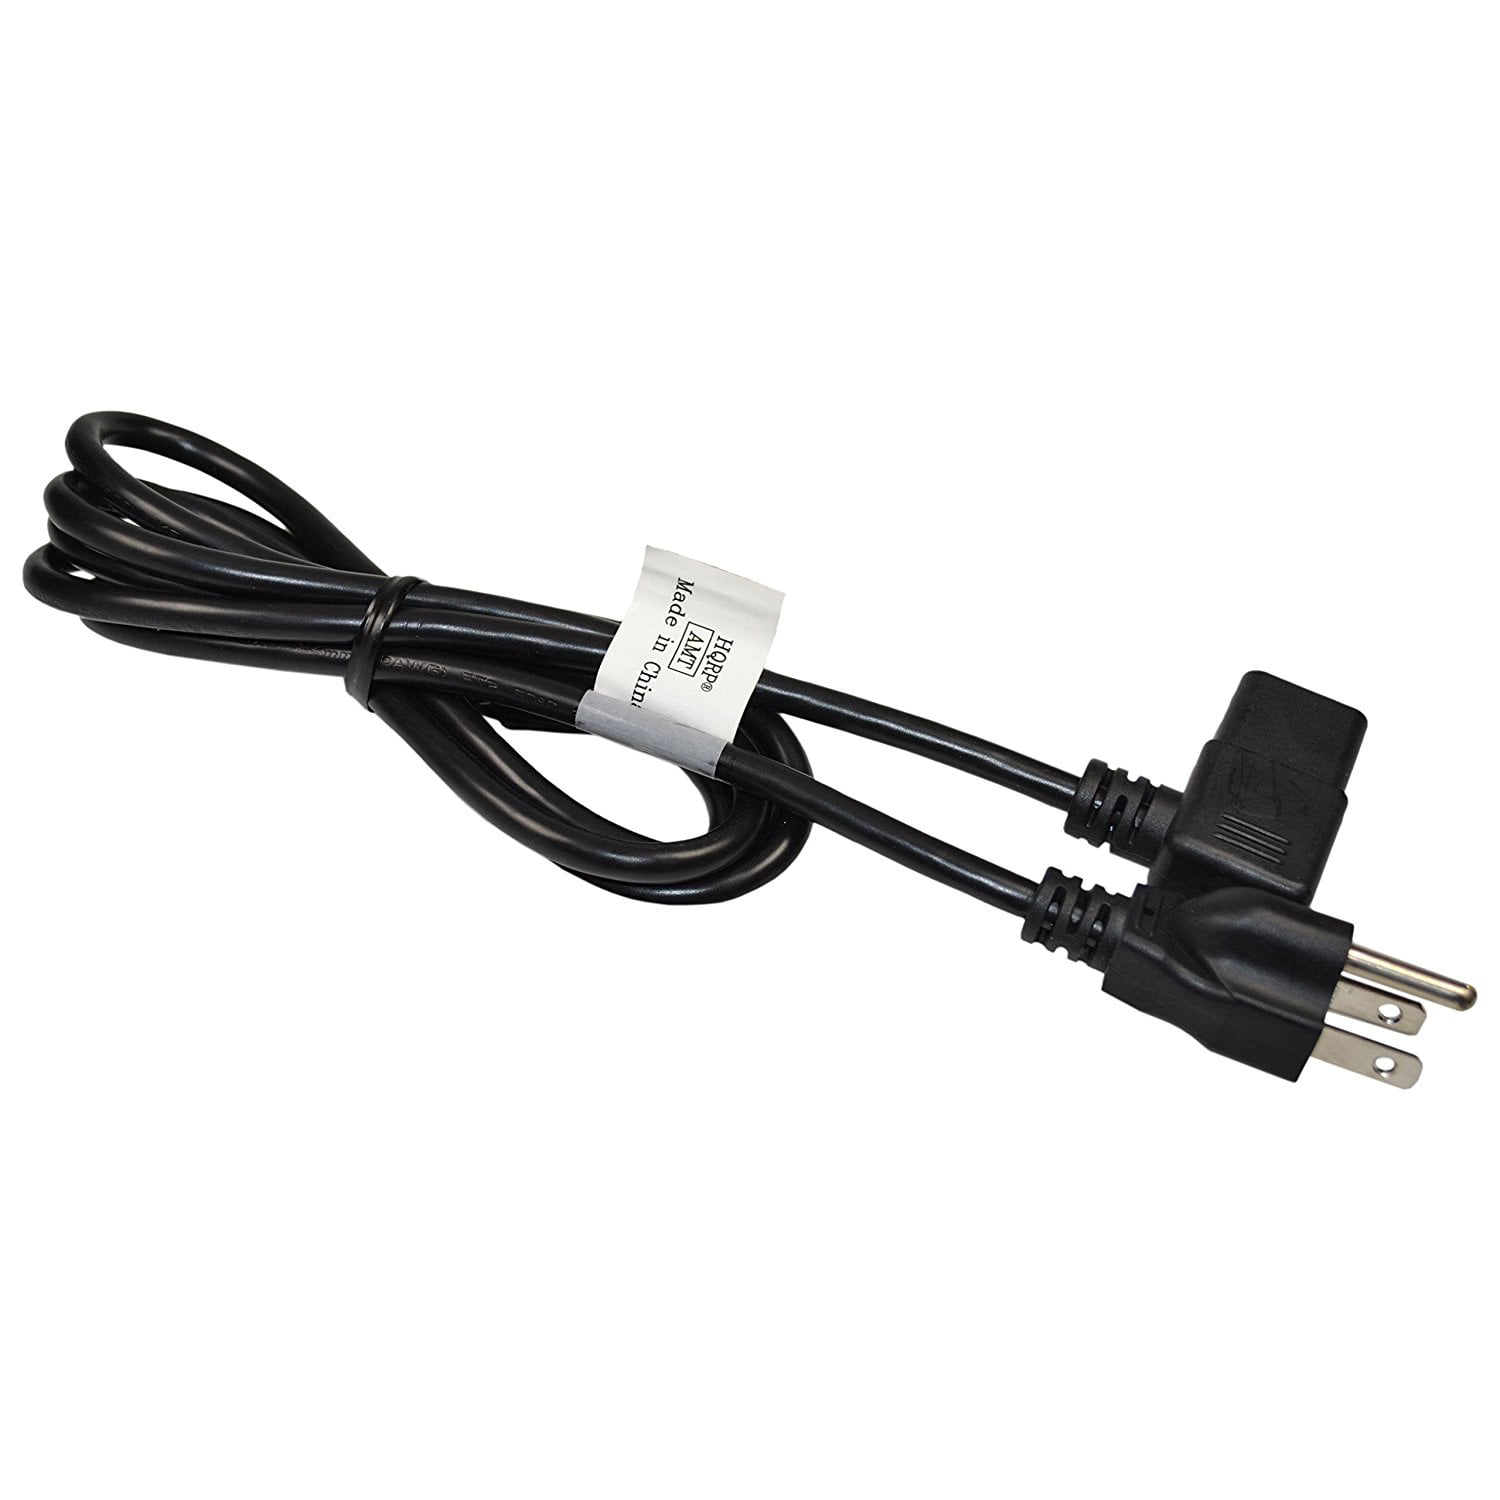 AC Power Cord Cable For Samsung LN Series TV Plasma DLP 3903-000467 3903-000144